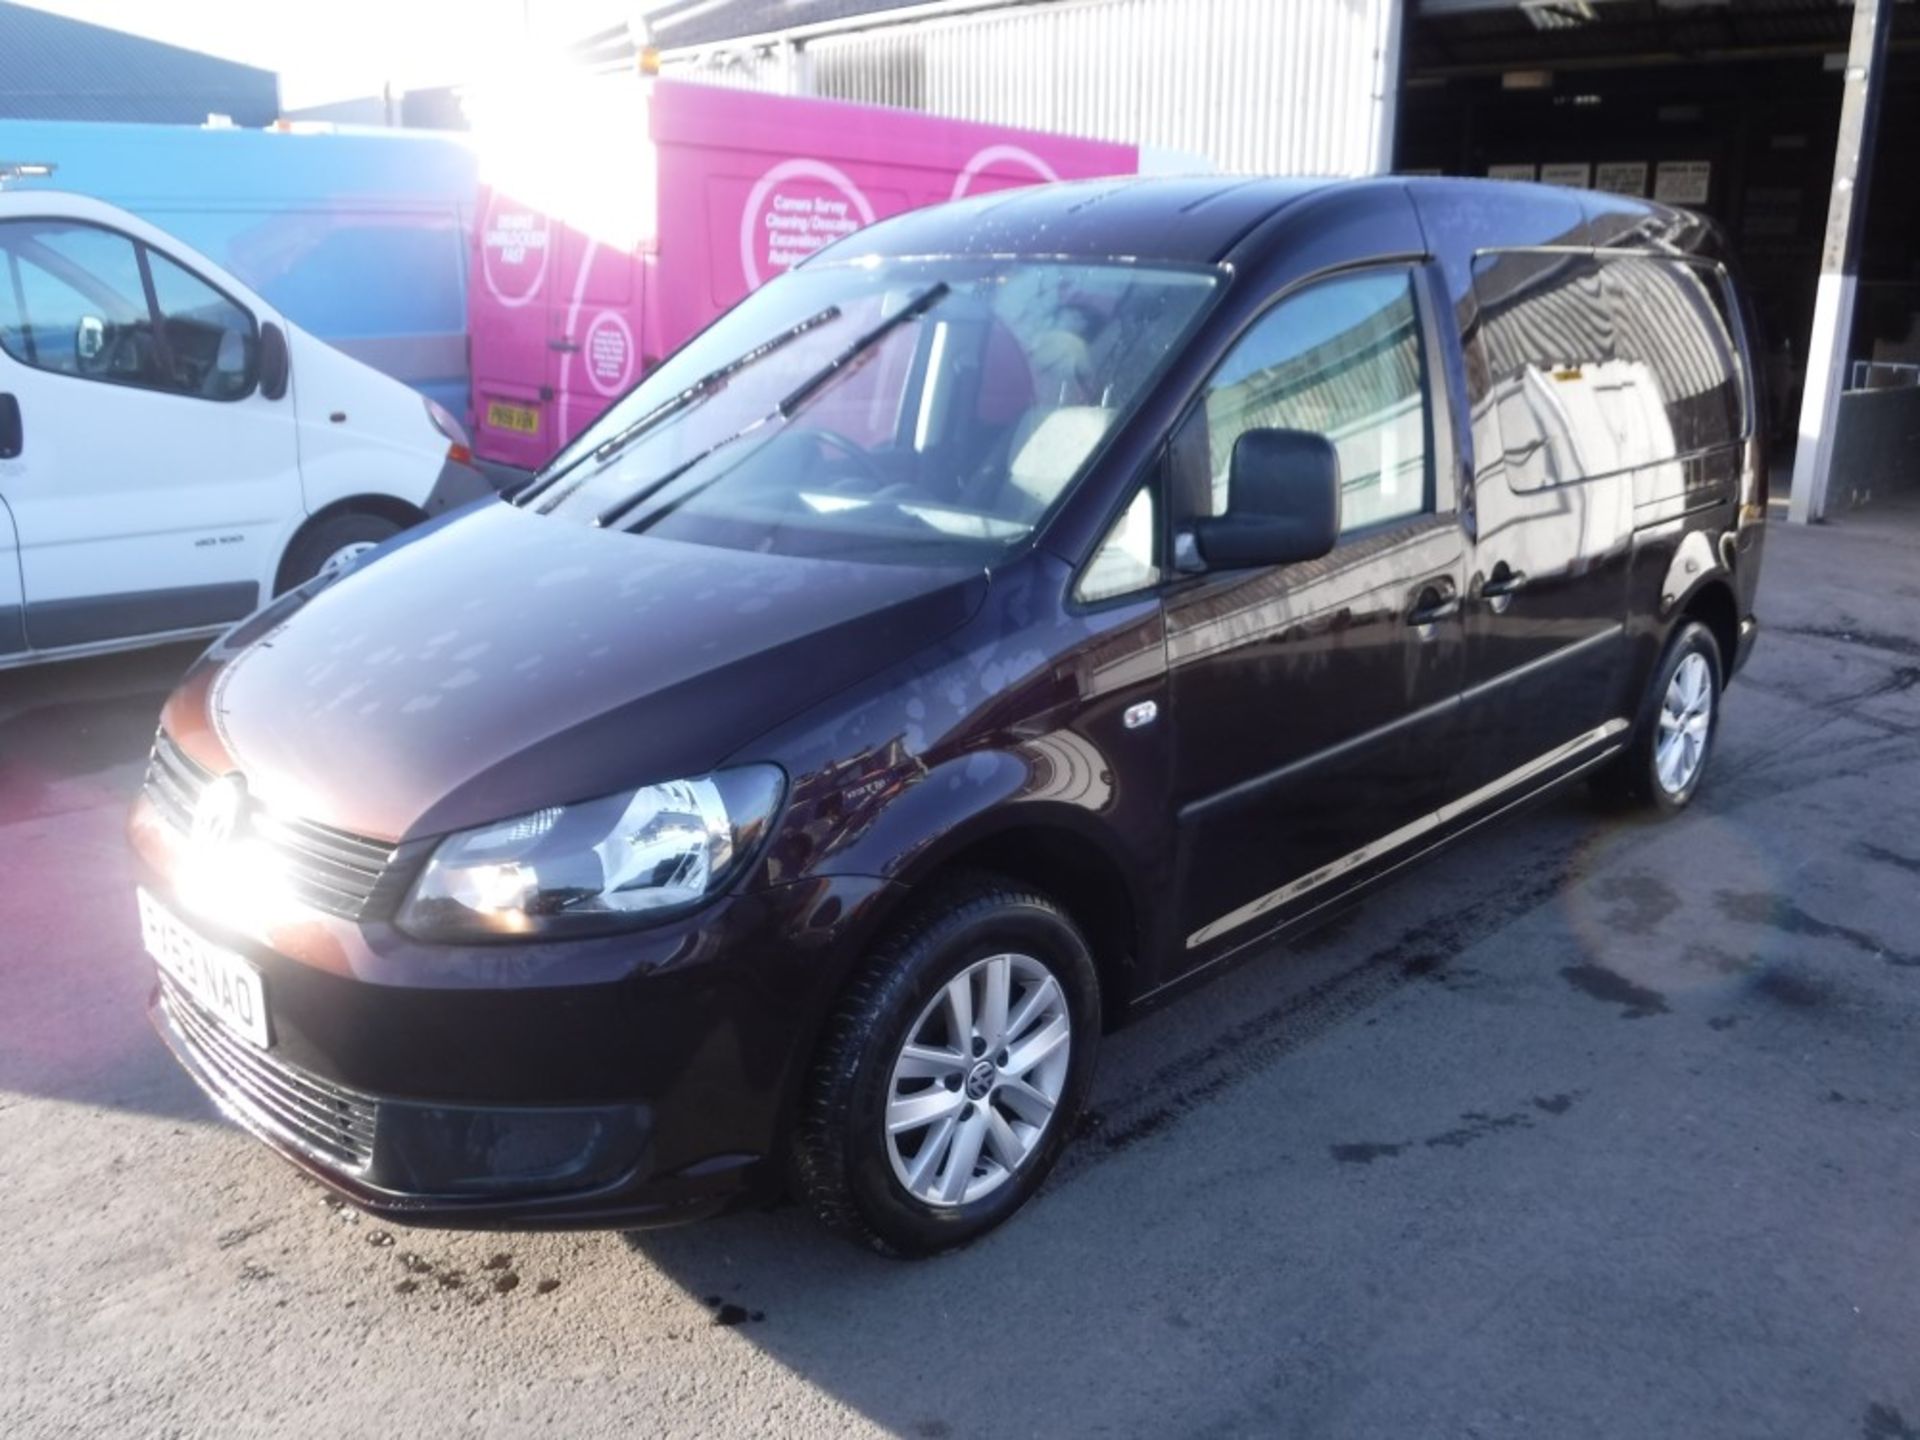 63 reg VW CADDY MAXI C20 TDI, 1ST REG 10/13, 118238M WARRANTED, V5 HERE, 1 OWNER FROM NEW [+ VAT] - Image 2 of 6